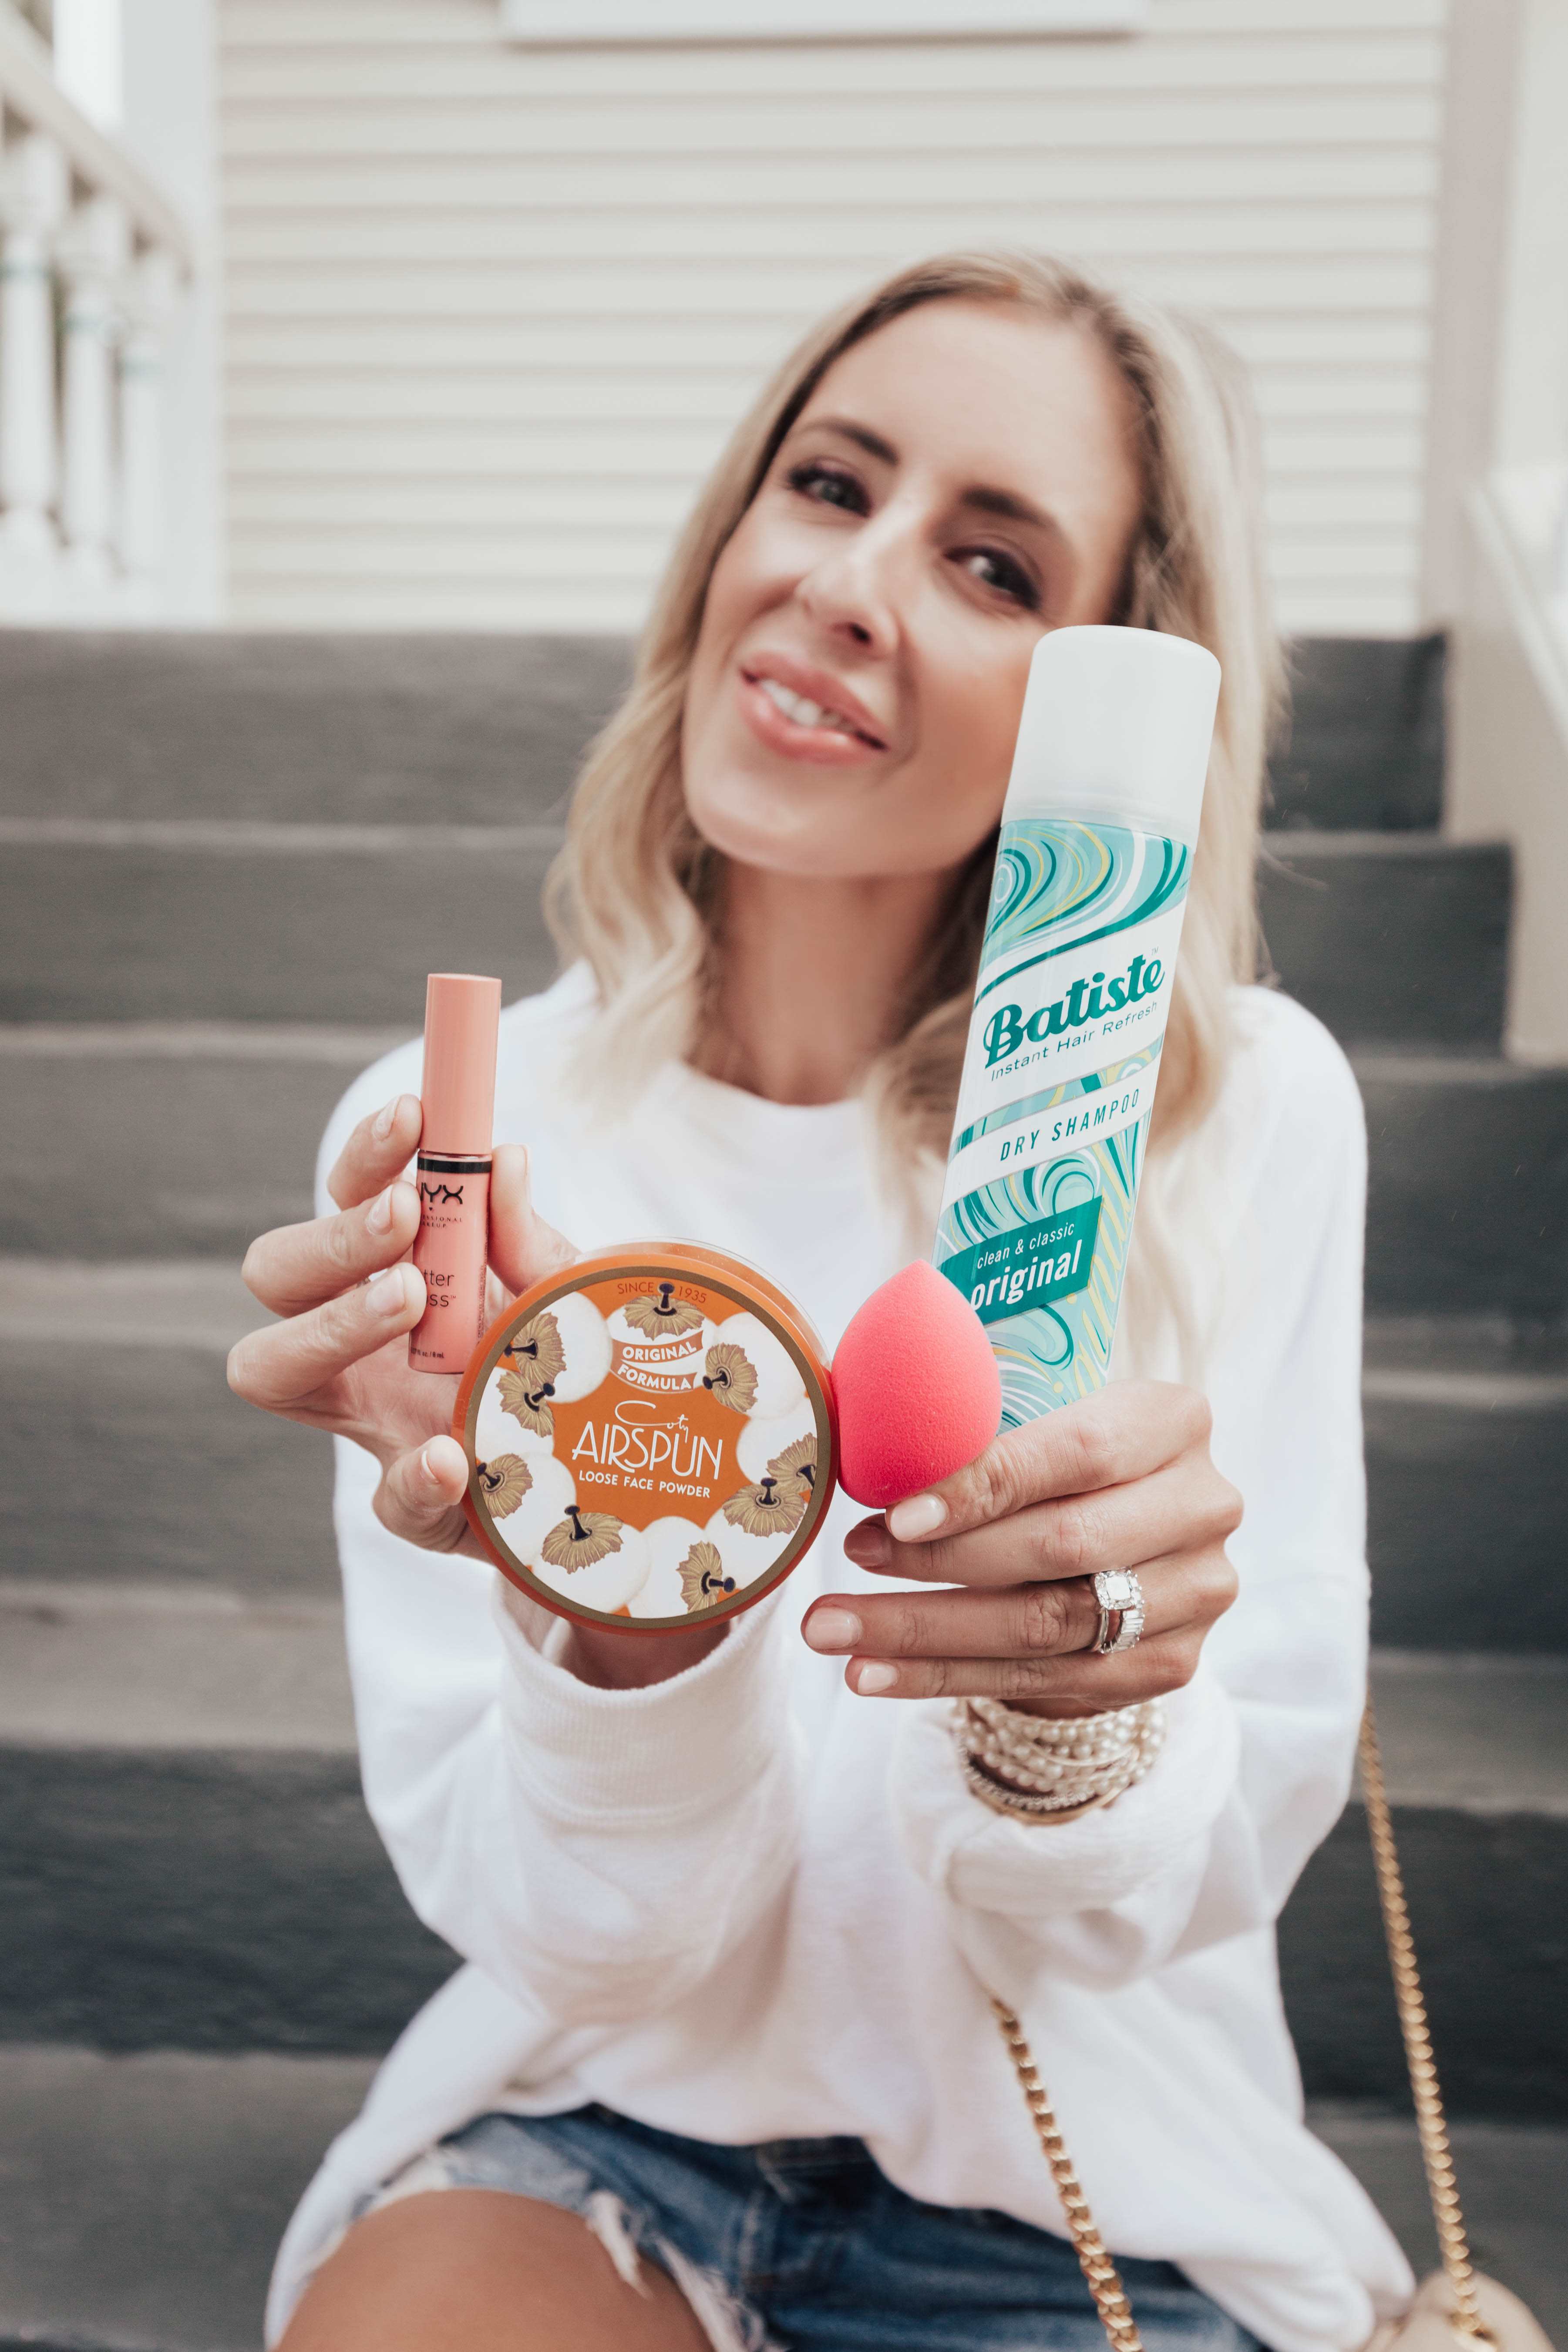 Fashion bloggers Emily Farren Wieczorek and Ashley Zeal share some of their favorite beauty secrets in this Drugstore Beauty Products post! 